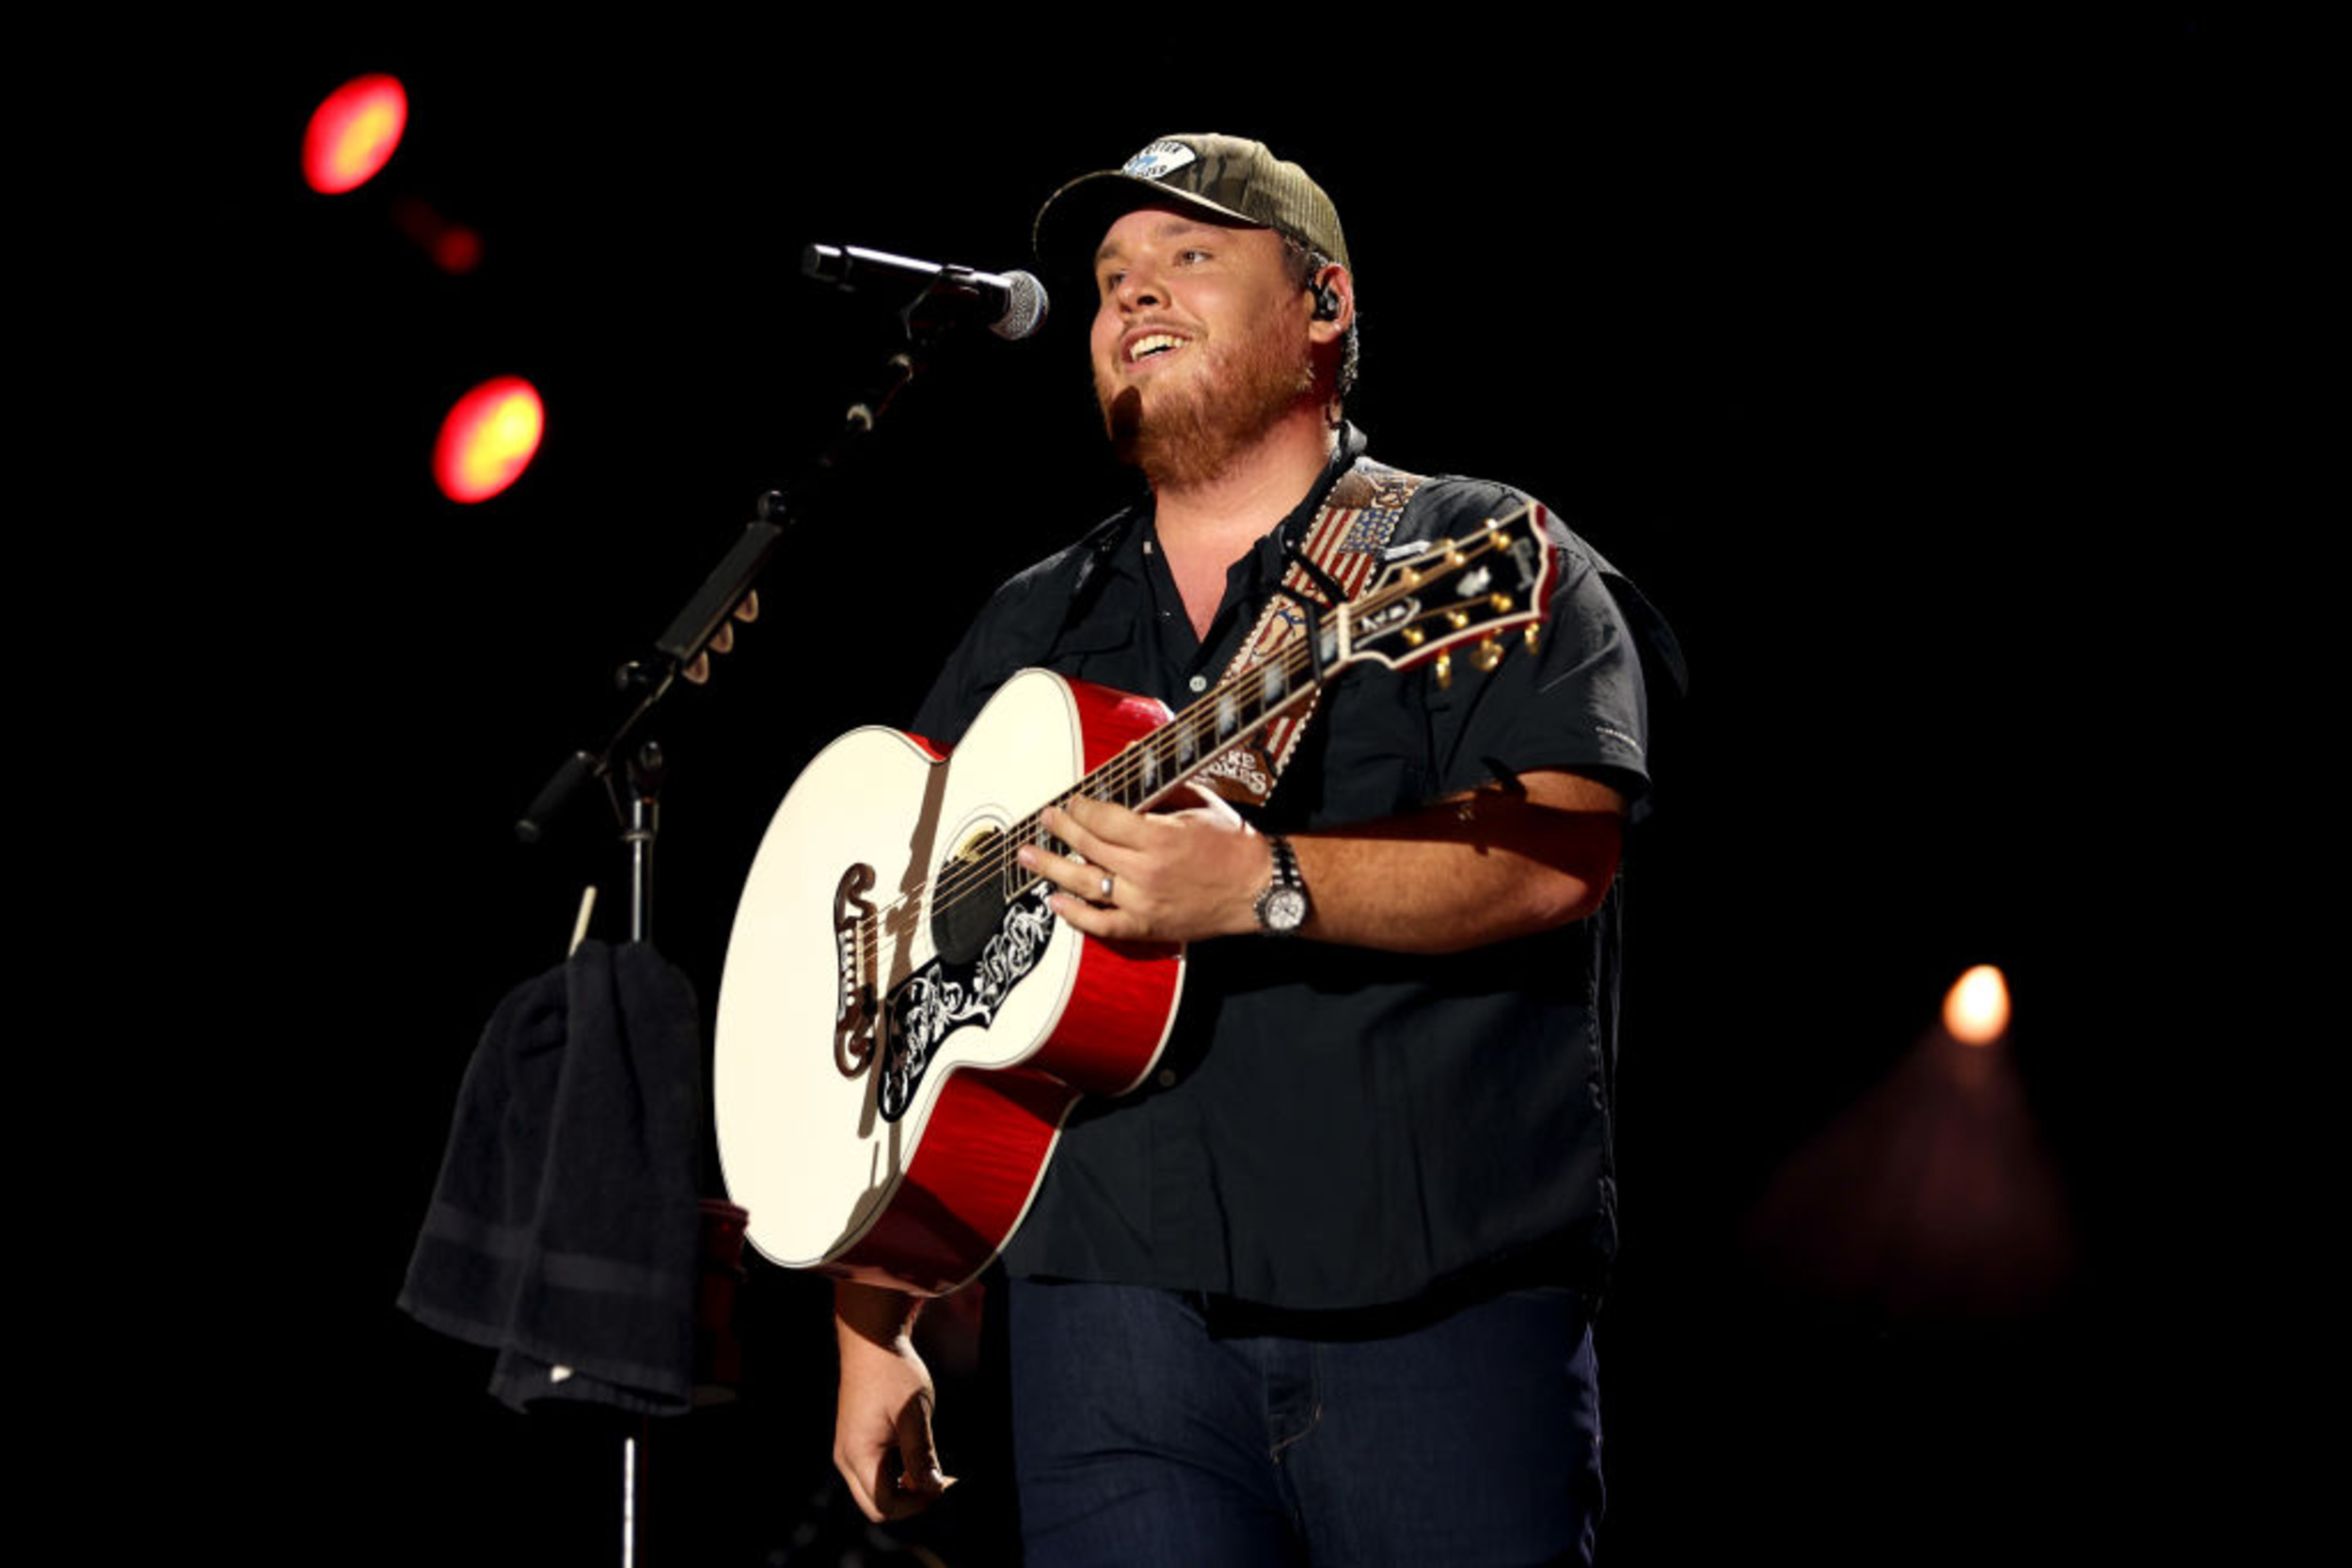 <p>Luke Combs's take on Tracy Chapman's much-revered "Fast Car" is currently burning up the country charts, and for good reason. It's faithful to the original, perfect for blaring while you contemplate life on your long drive. </p><p><a href='https://www.msn.com/en-us/community/channel/vid-cj9pqbr0vn9in2b6ddcd8sfgpfq6x6utp44fssrv6mc2gtybw0us'>Follow us on MSN to see more of our exclusive entertainment content.</a></p>